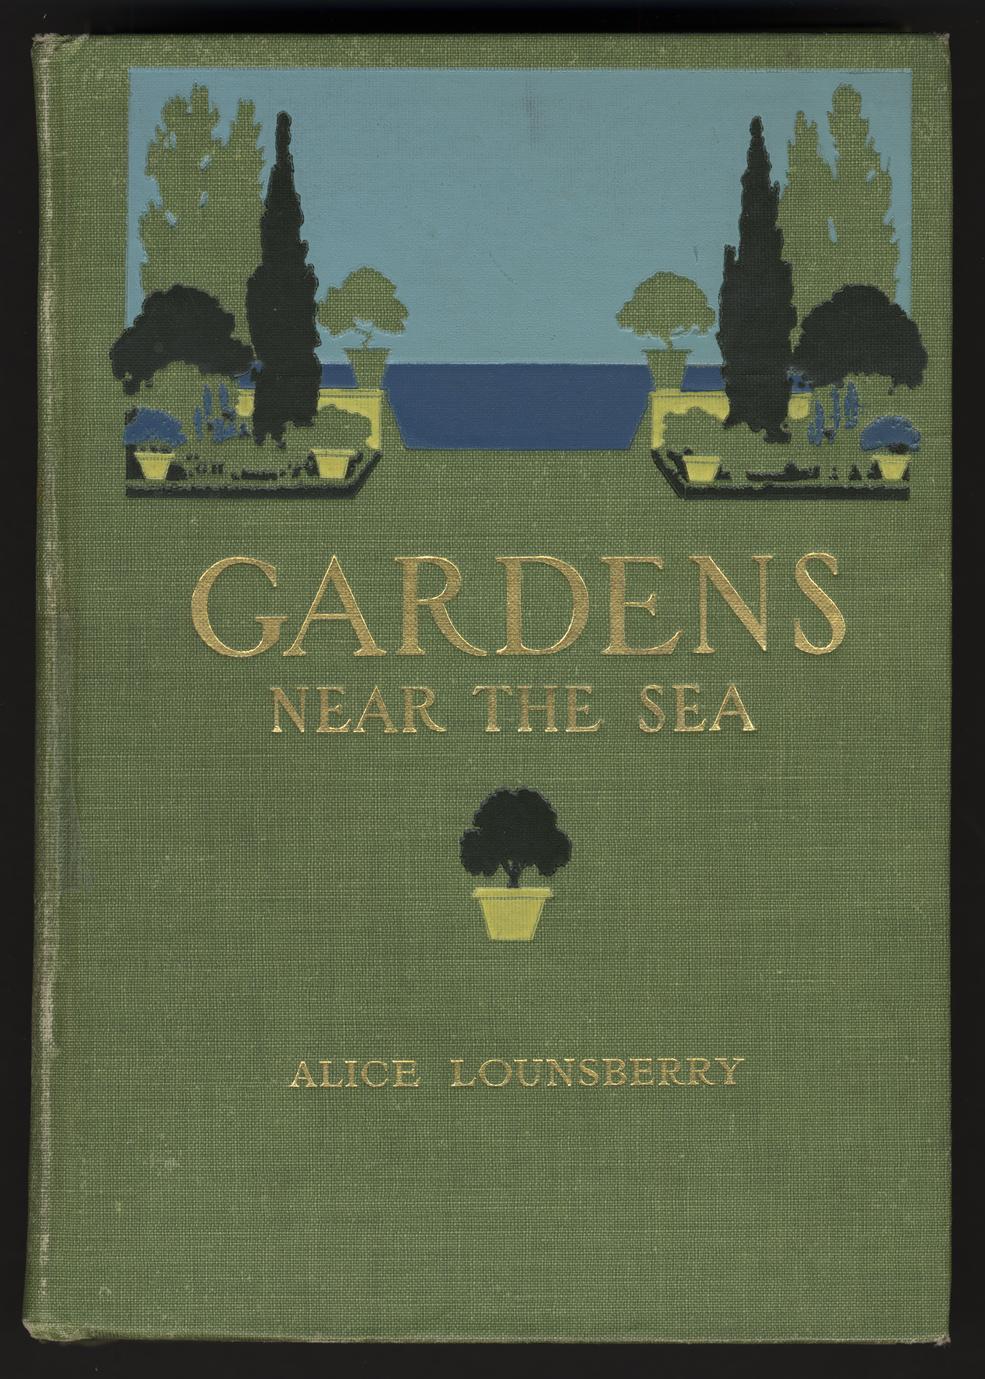 Gardens near the sea : the making and care of gardens on or near the coast with reference also to lawns and grounds and to trees and shrubbery (1 of 2)